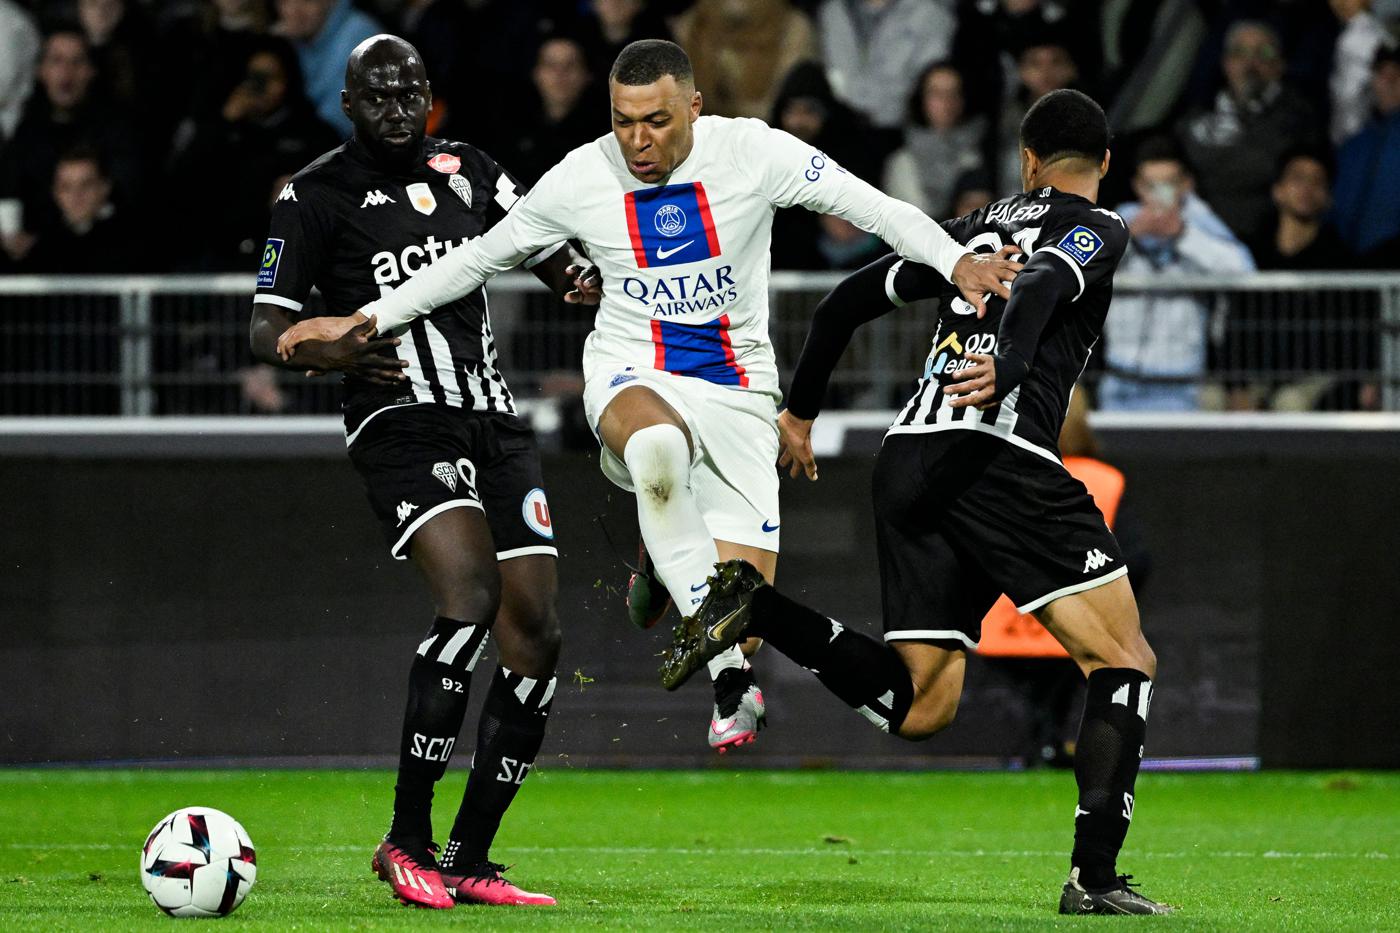 Angers vs PSG - 1:2. French Championship, round 32. Match review, statistics.